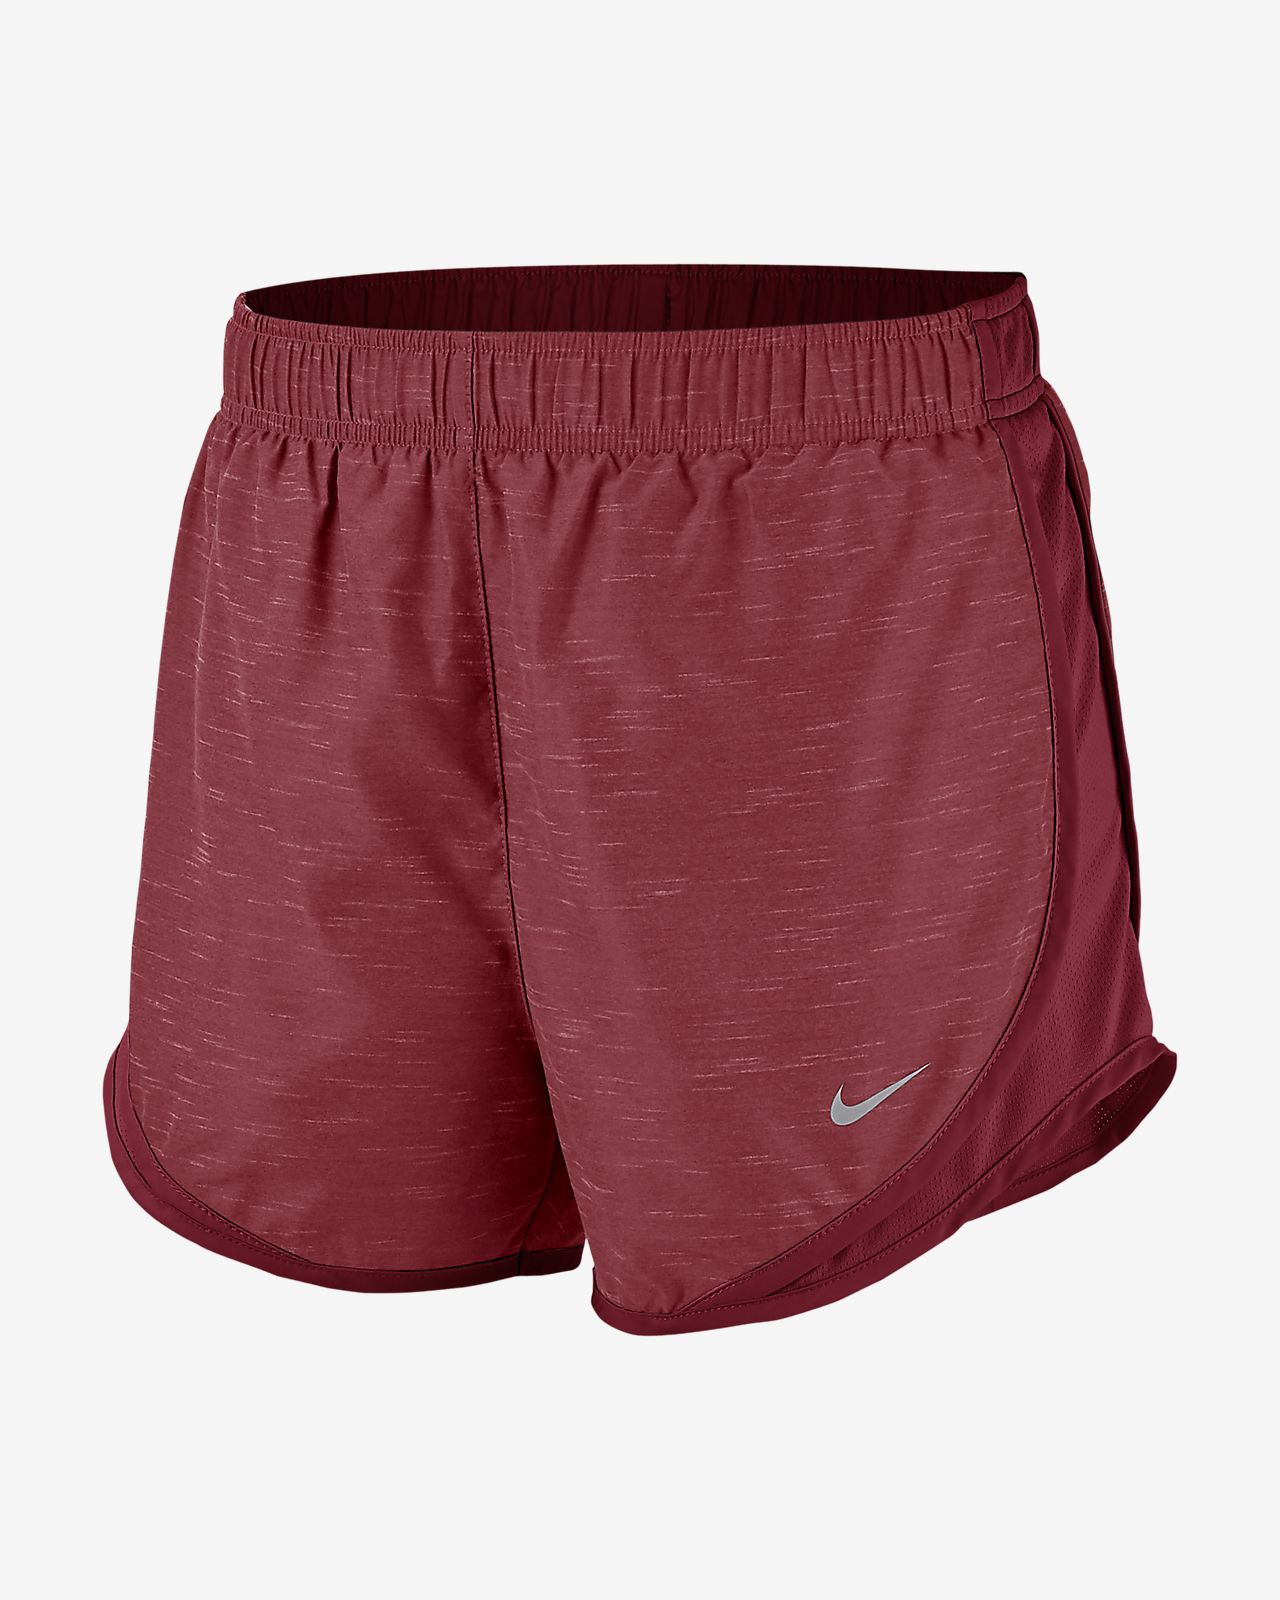 1x nike tempo shorts buy clothes shoes 